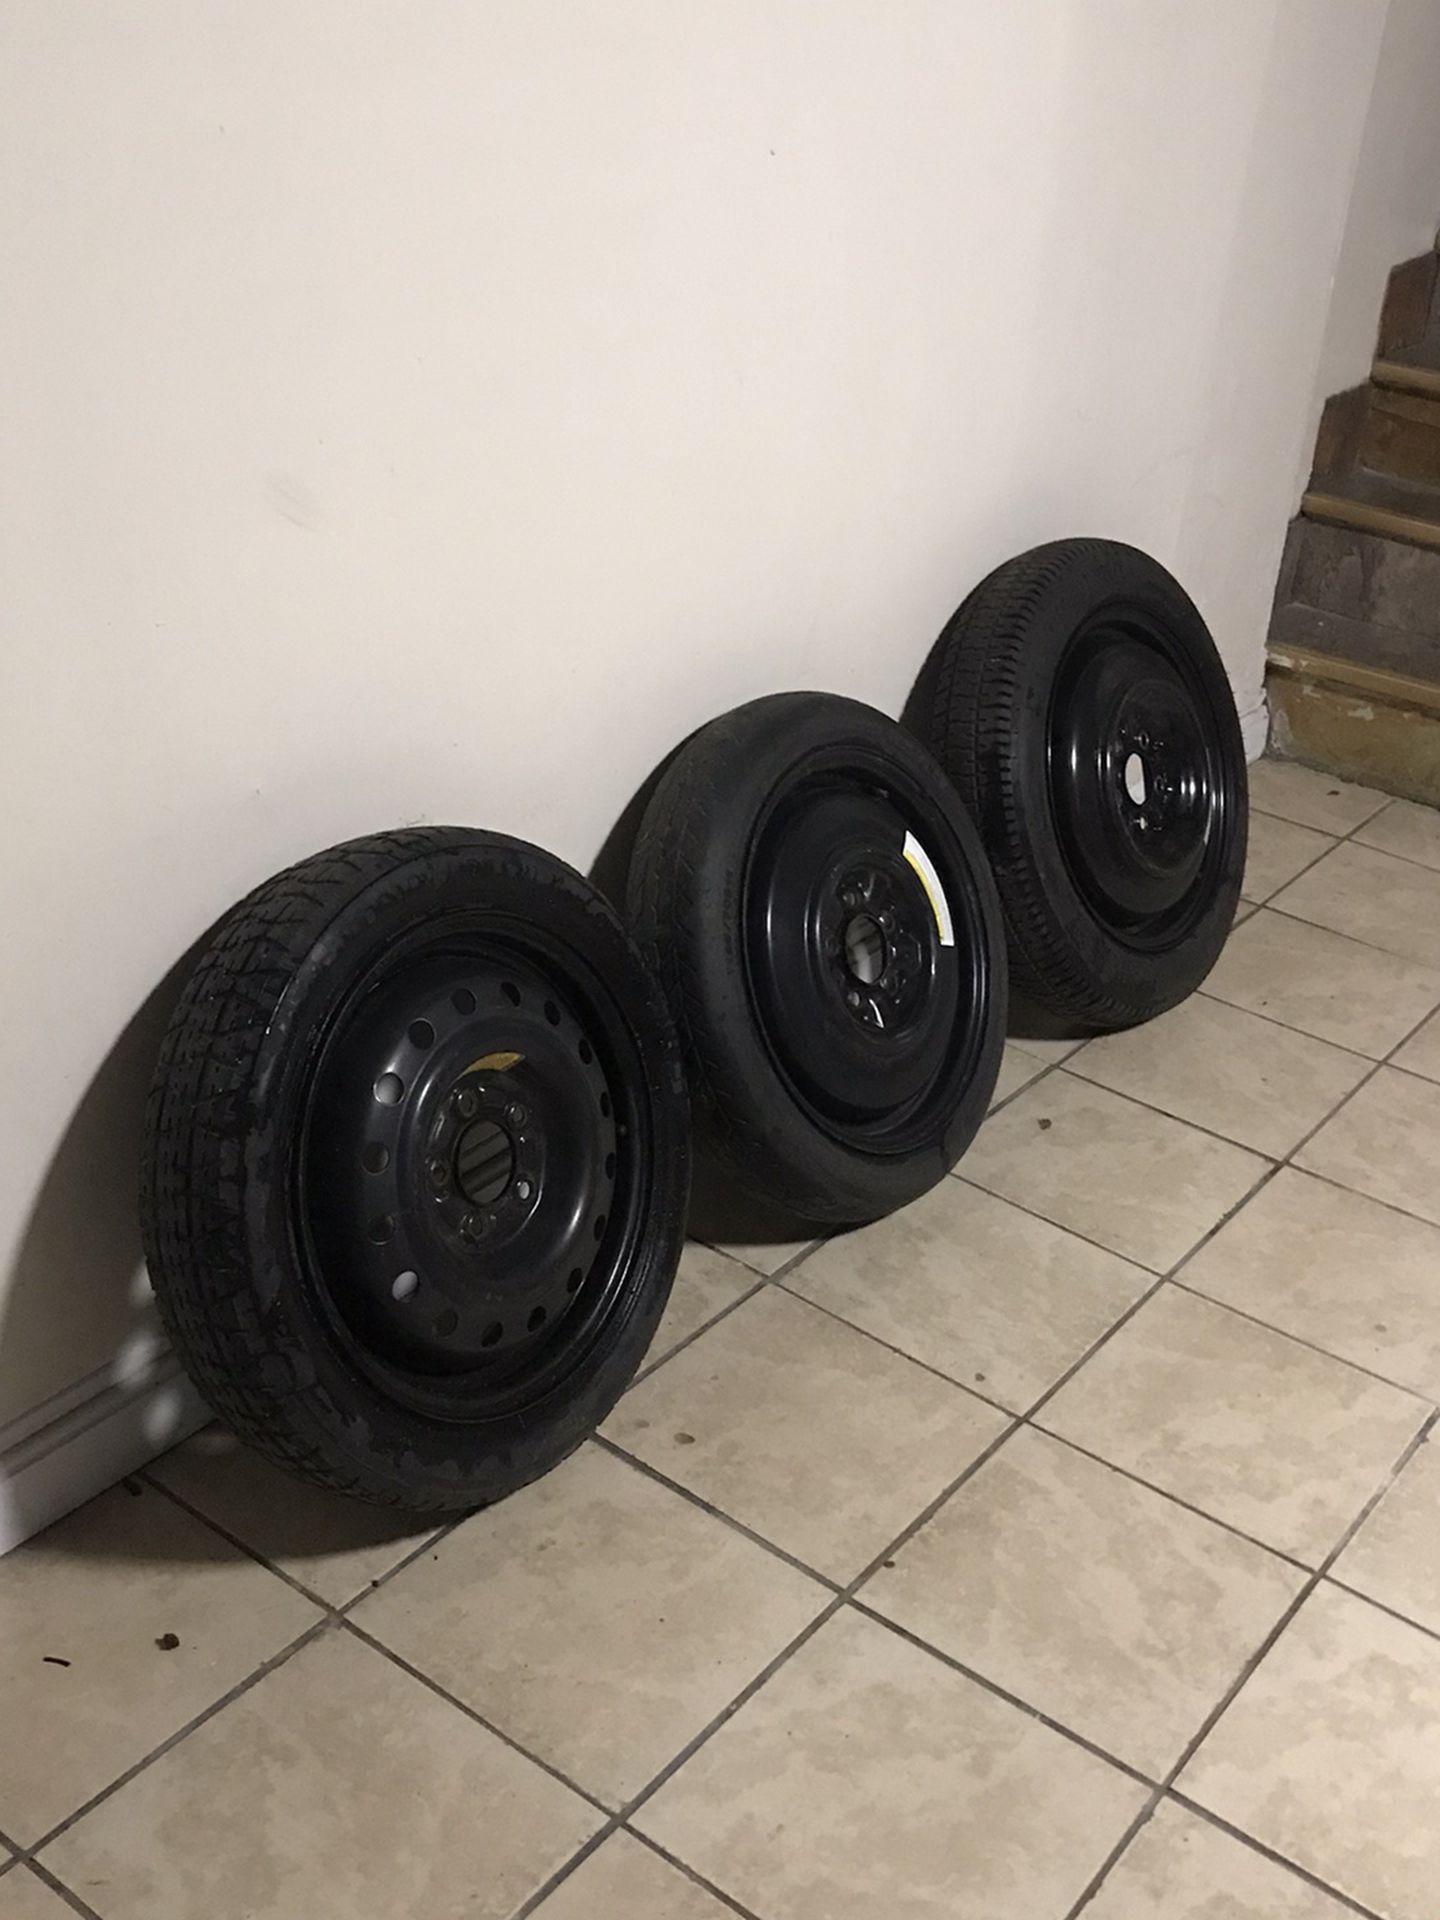 3 Spares Tires 5lugs